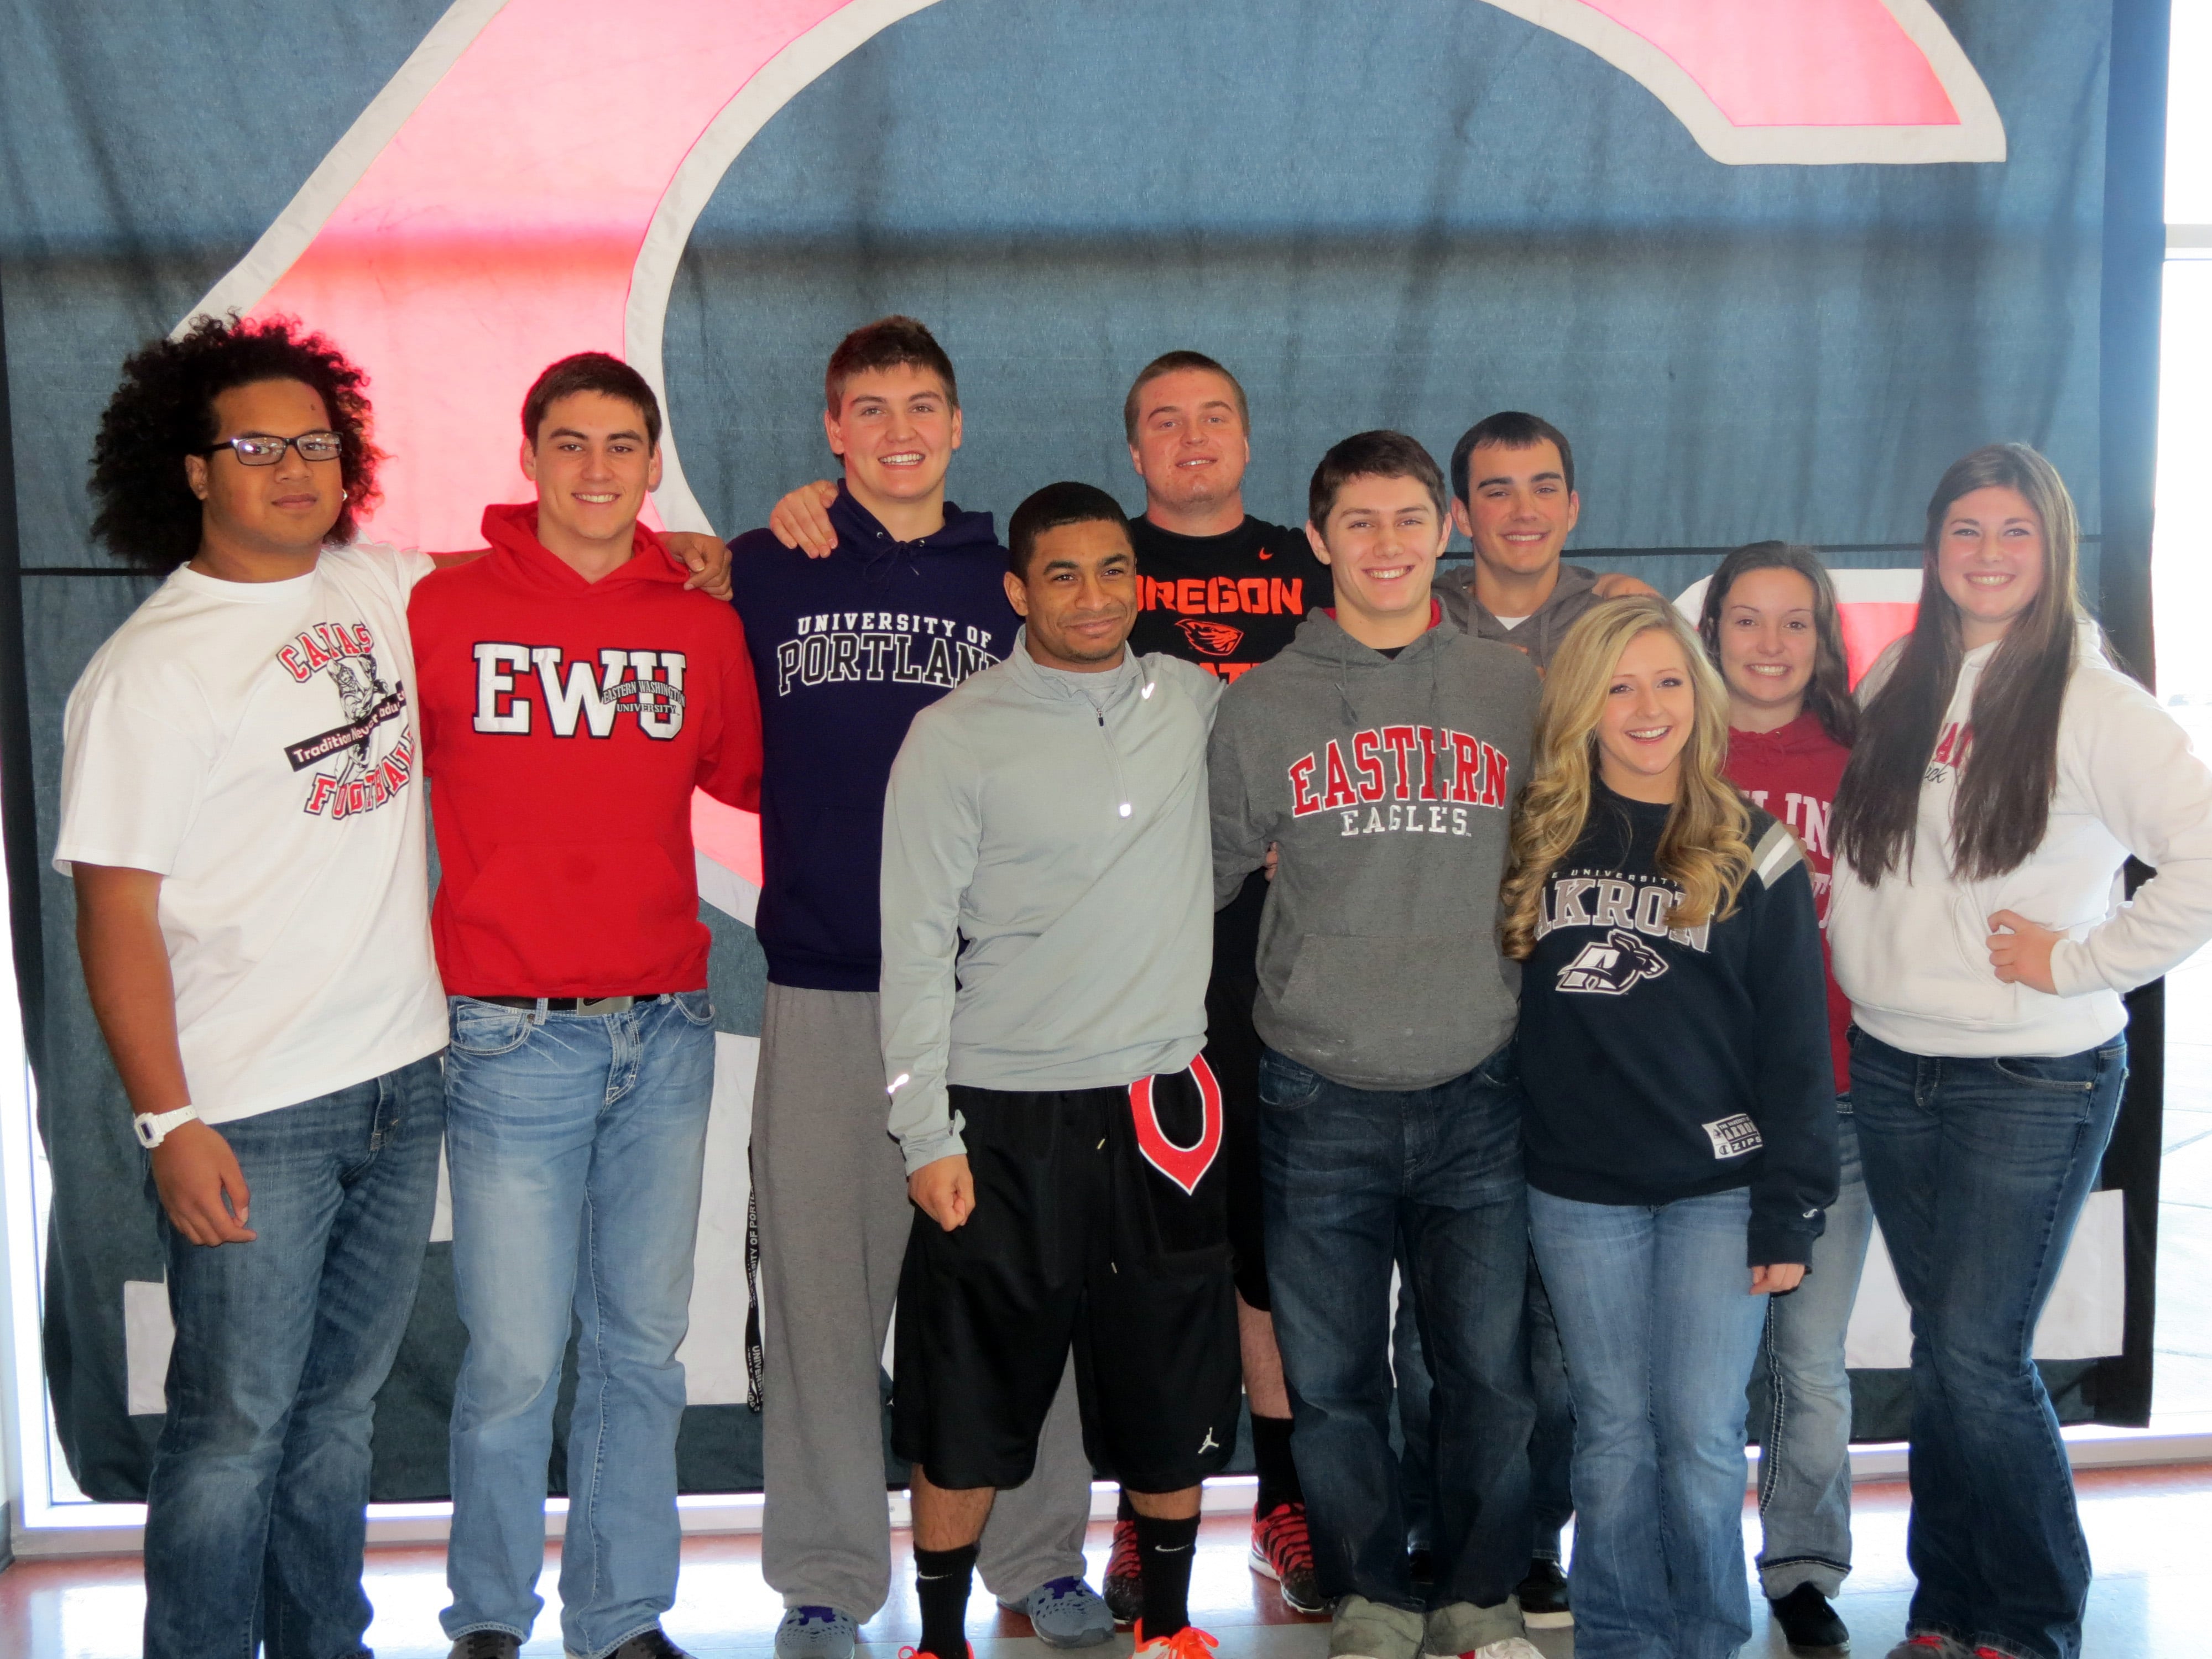 Ten Camas High School seniors participated in National College Signing Day. Pictured in the back row (left to right): Jason Vailea, Reilly Hennessey, Dylan White, Drew Clarkson, Blake Christopher, Teylen Sheesely and Harli Hubbard; front row (left to right): Jorden Payne, Zach Eagle and Lena Richards.